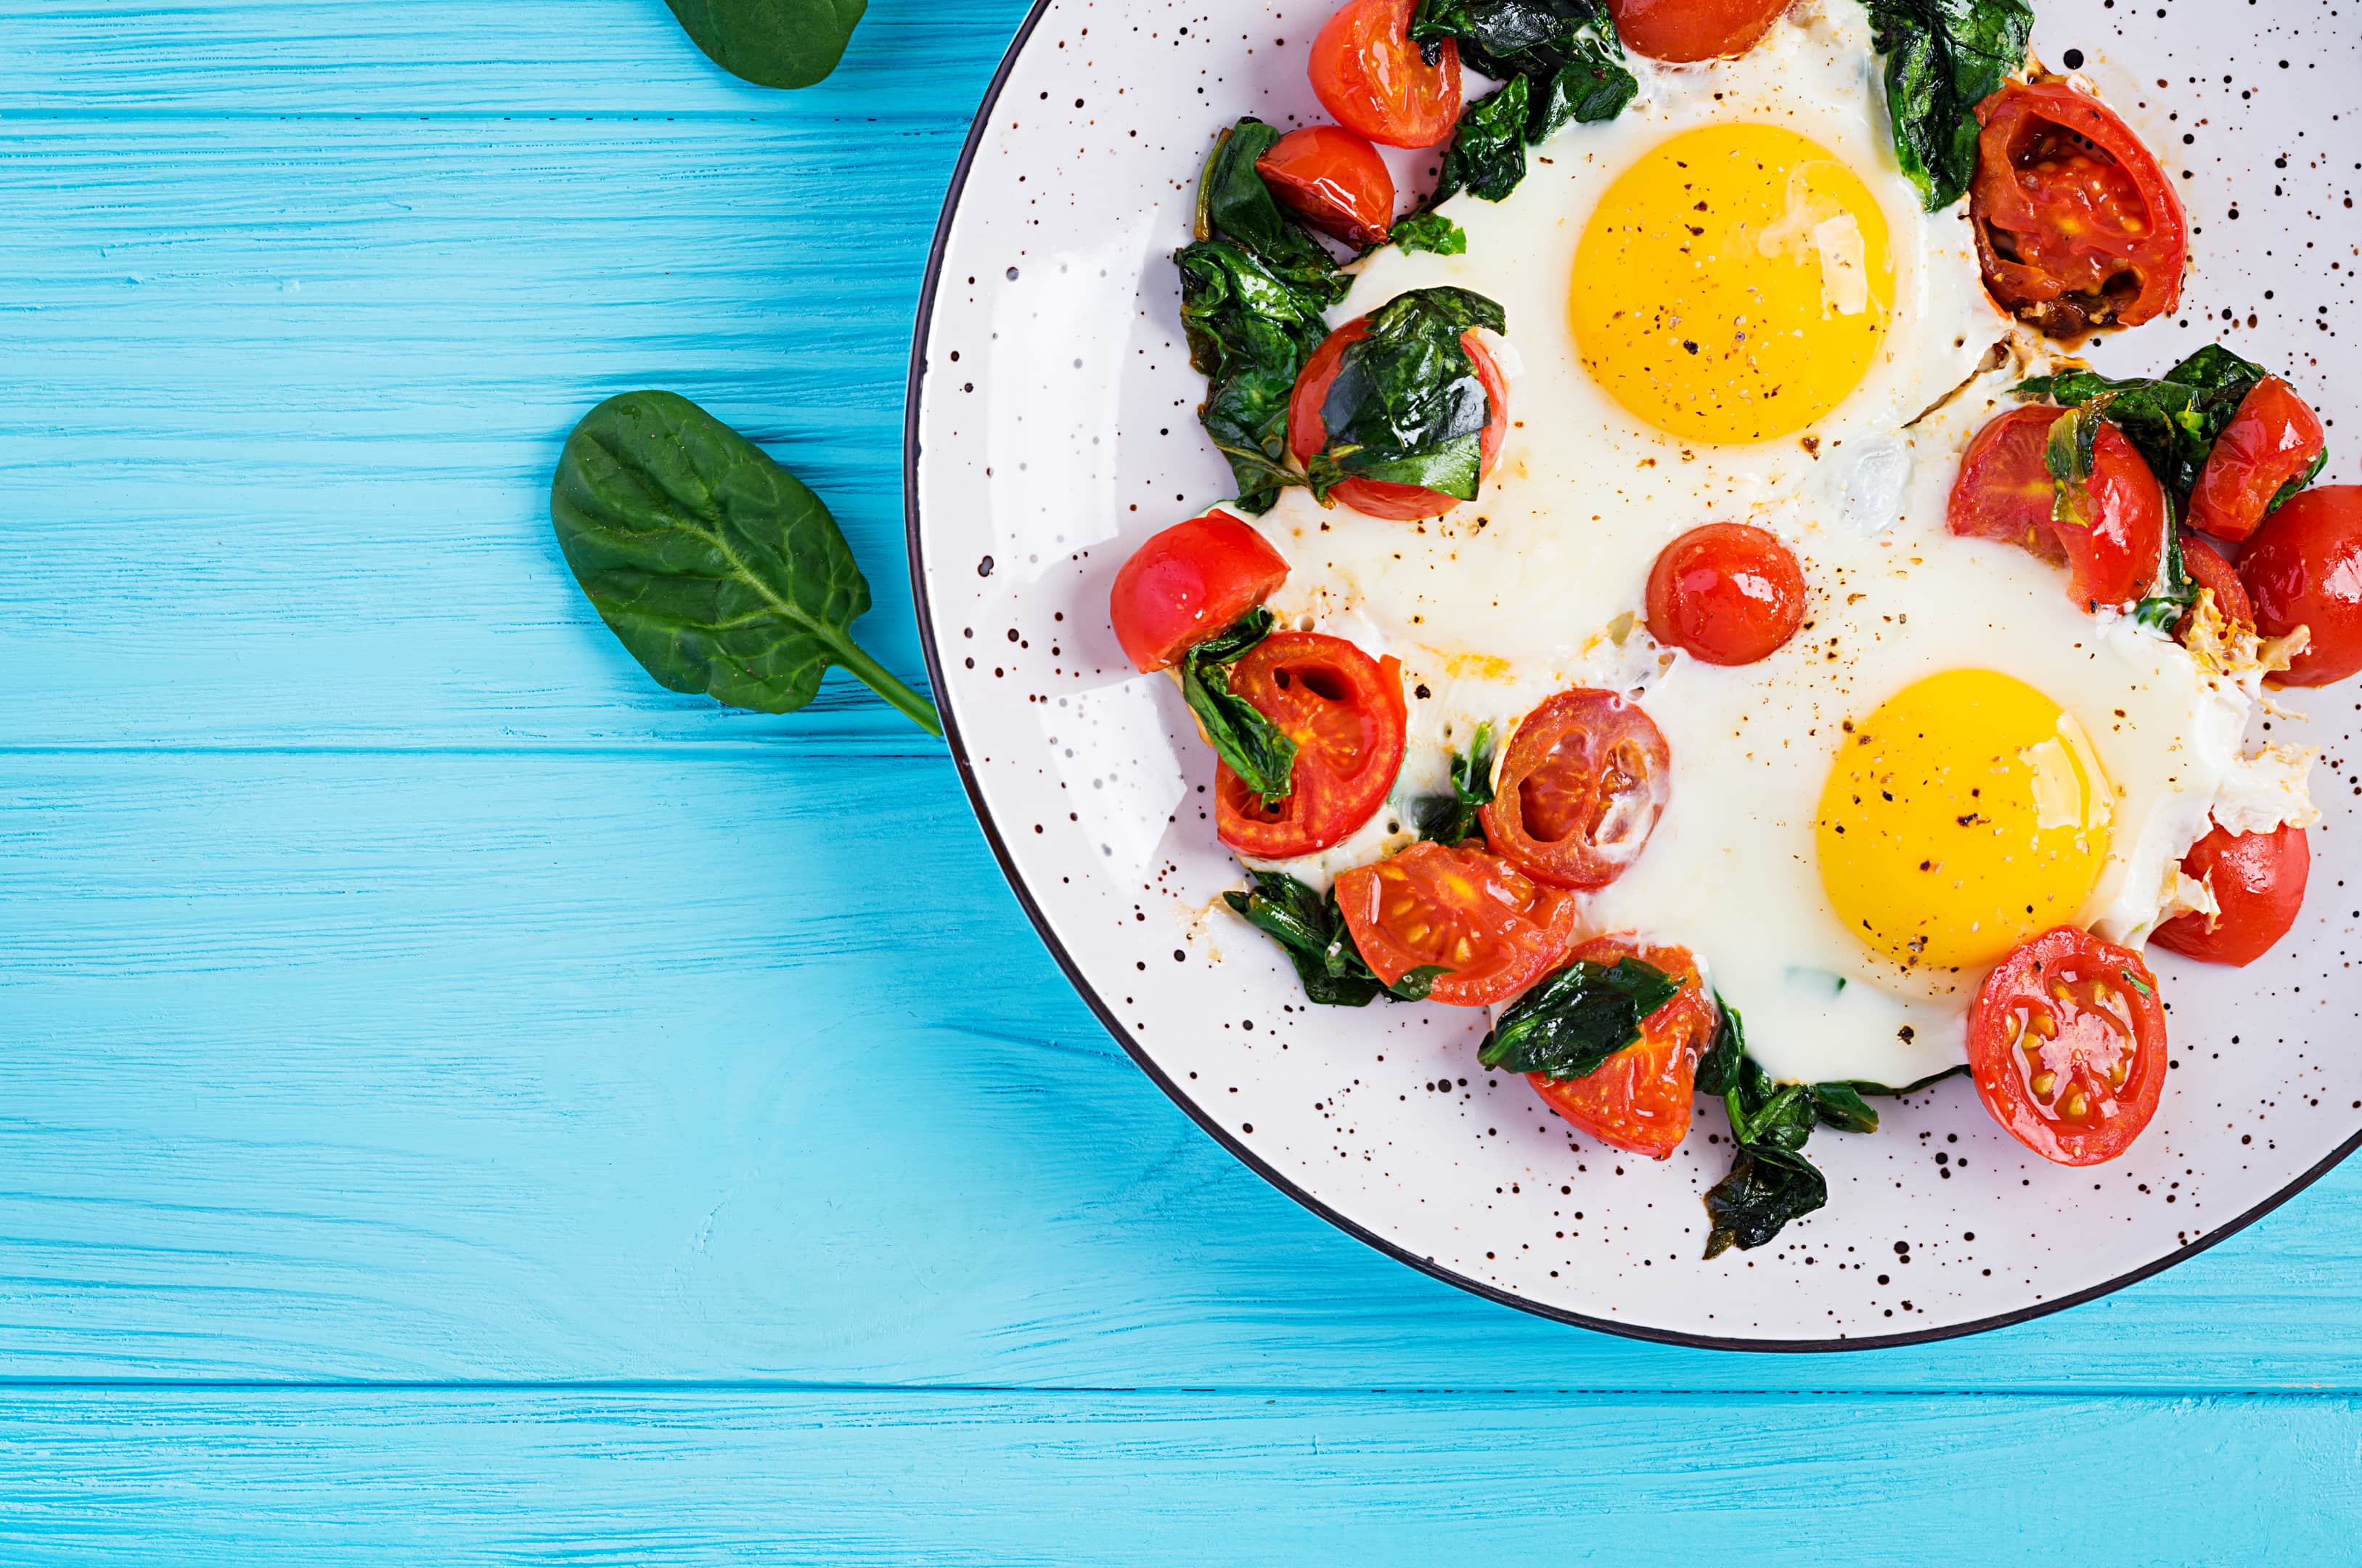 Fried egg, spinach, and cherry tomatoes in a plate